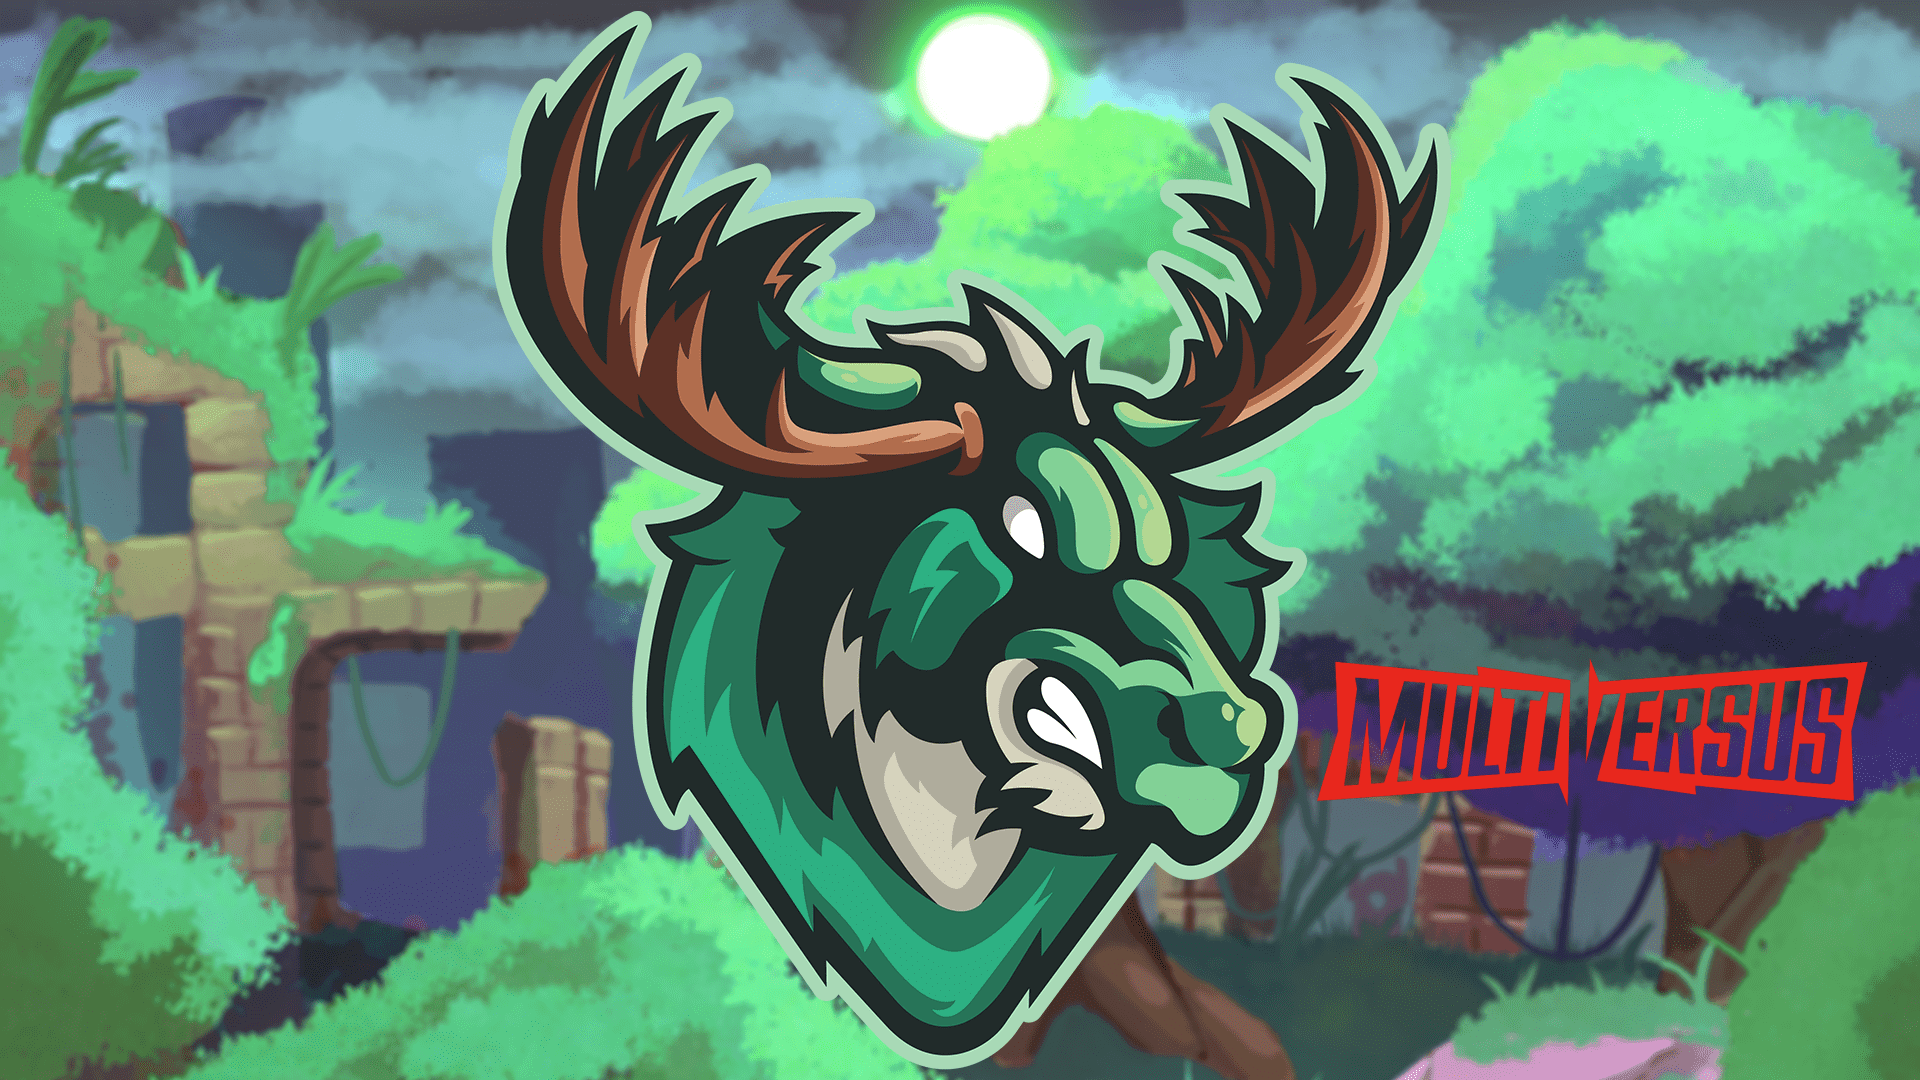 Moose Wars has the First Ever MultiVersus Tournament